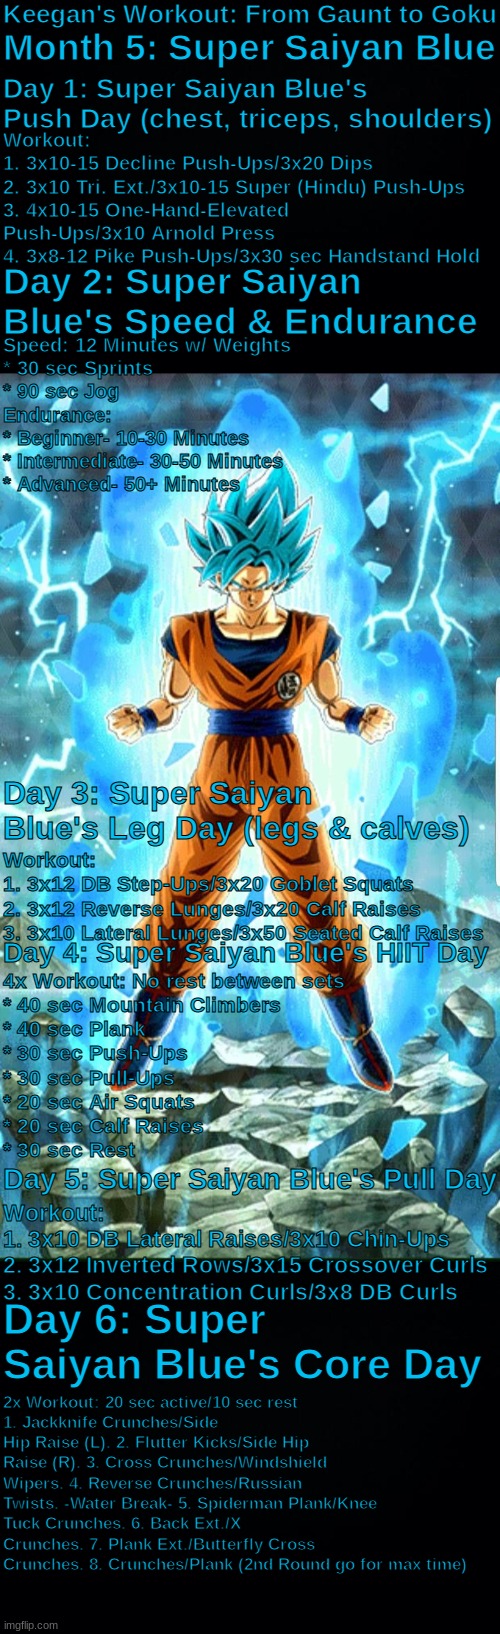 Super Saiyan Blue Workout: Strength Building. not Muscle Building | Keegan's Workout: From Gaunt to Goku; Month 5: Super Saiyan Blue; Day 1: Super Saiyan Blue's Push Day (chest, triceps, shoulders); Workout:
1. 3x10-15 Decline Push-Ups/3x20 Dips
2. 3x10 Tri. Ext./3x10-15 Super (Hindu) Push-Ups
3. 4x10-15 One-Hand-Elevated Push-Ups/3x10 Arnold Press
4. 3x8-12 Pike Push-Ups/3x30 sec Handstand Hold; Day 2: Super Saiyan Blue's Speed & Endurance; Speed: 12 Minutes w/ Weights
* 30 sec Sprints
* 90 sec Jog
Endurance:
* Beginner- 10-30 Minutes
* Intermediate- 30-50 Minutes
* Advanced- 50+ Minutes; Day 3: Super Saiyan Blue's Leg Day (legs & calves); Workout:
1. 3x12 DB Step-Ups/3x20 Goblet Squats
2. 3x12 Reverse Lunges/3x20 Calf Raises
3. 3x10 Lateral Lunges/3x50 Seated Calf Raises; Day 4: Super Saiyan Blue's HIIT Day; 4x Workout: No rest between sets
* 40 sec Mountain Climbers
* 40 sec Plank
* 30 sec Push-Ups
* 30 sec Pull-Ups
* 20 sec Air Squats
* 20 sec Calf Raises
* 30 sec Rest; Day 5: Super Saiyan Blue's Pull Day; Workout:
1. 3x10 DB Lateral Raises/3x10 Chin-Ups
2. 3x12 Inverted Rows/3x15 Crossover Curls
3. 3x10 Concentration Curls/3x8 DB Curls; Day 6: Super Saiyan Blue's Core Day; 2x Workout: 20 sec active/10 sec rest
1. Jackknife Crunches/Side Hip Raise (L). 2. Flutter Kicks/Side Hip Raise (R). 3. Cross Crunches/Windshield Wipers. 4. Reverse Crunches/Russian Twists. -Water Break- 5. Spiderman Plank/Knee Tuck Crunches. 6. Back Ext./X Crunches. 7. Plank Ext./Butterfly Cross Crunches. 8. Crunches/Plank (2nd Round go for max time) | image tagged in super saiyan blue,god ki,workout,strength not muscle,limit breaking,goku | made w/ Imgflip meme maker